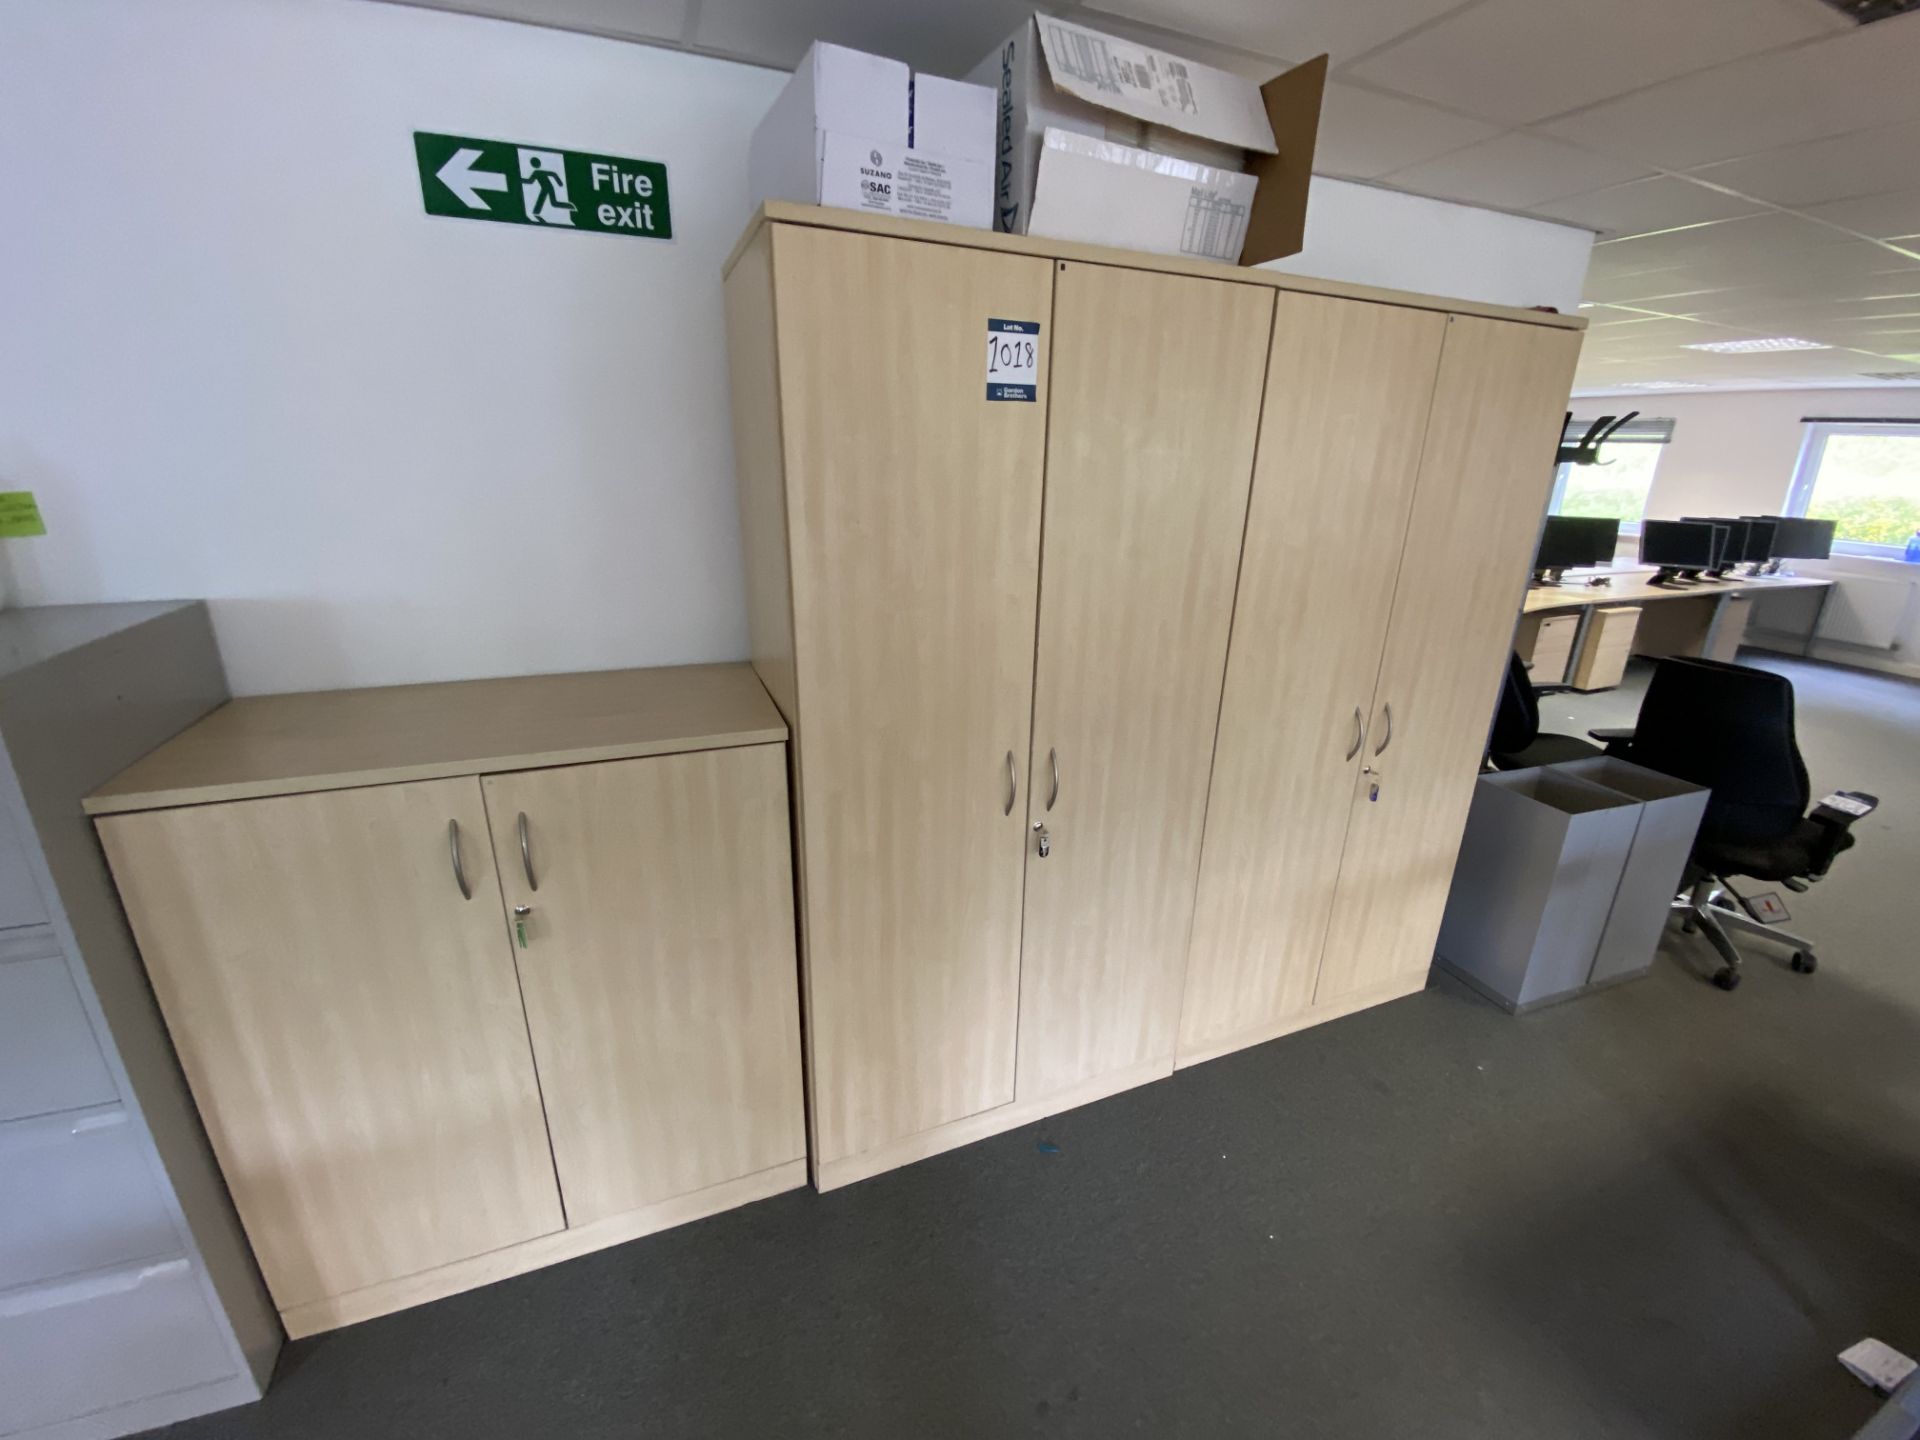 Lot comprisng: four wooden storage cupboards in various sizes